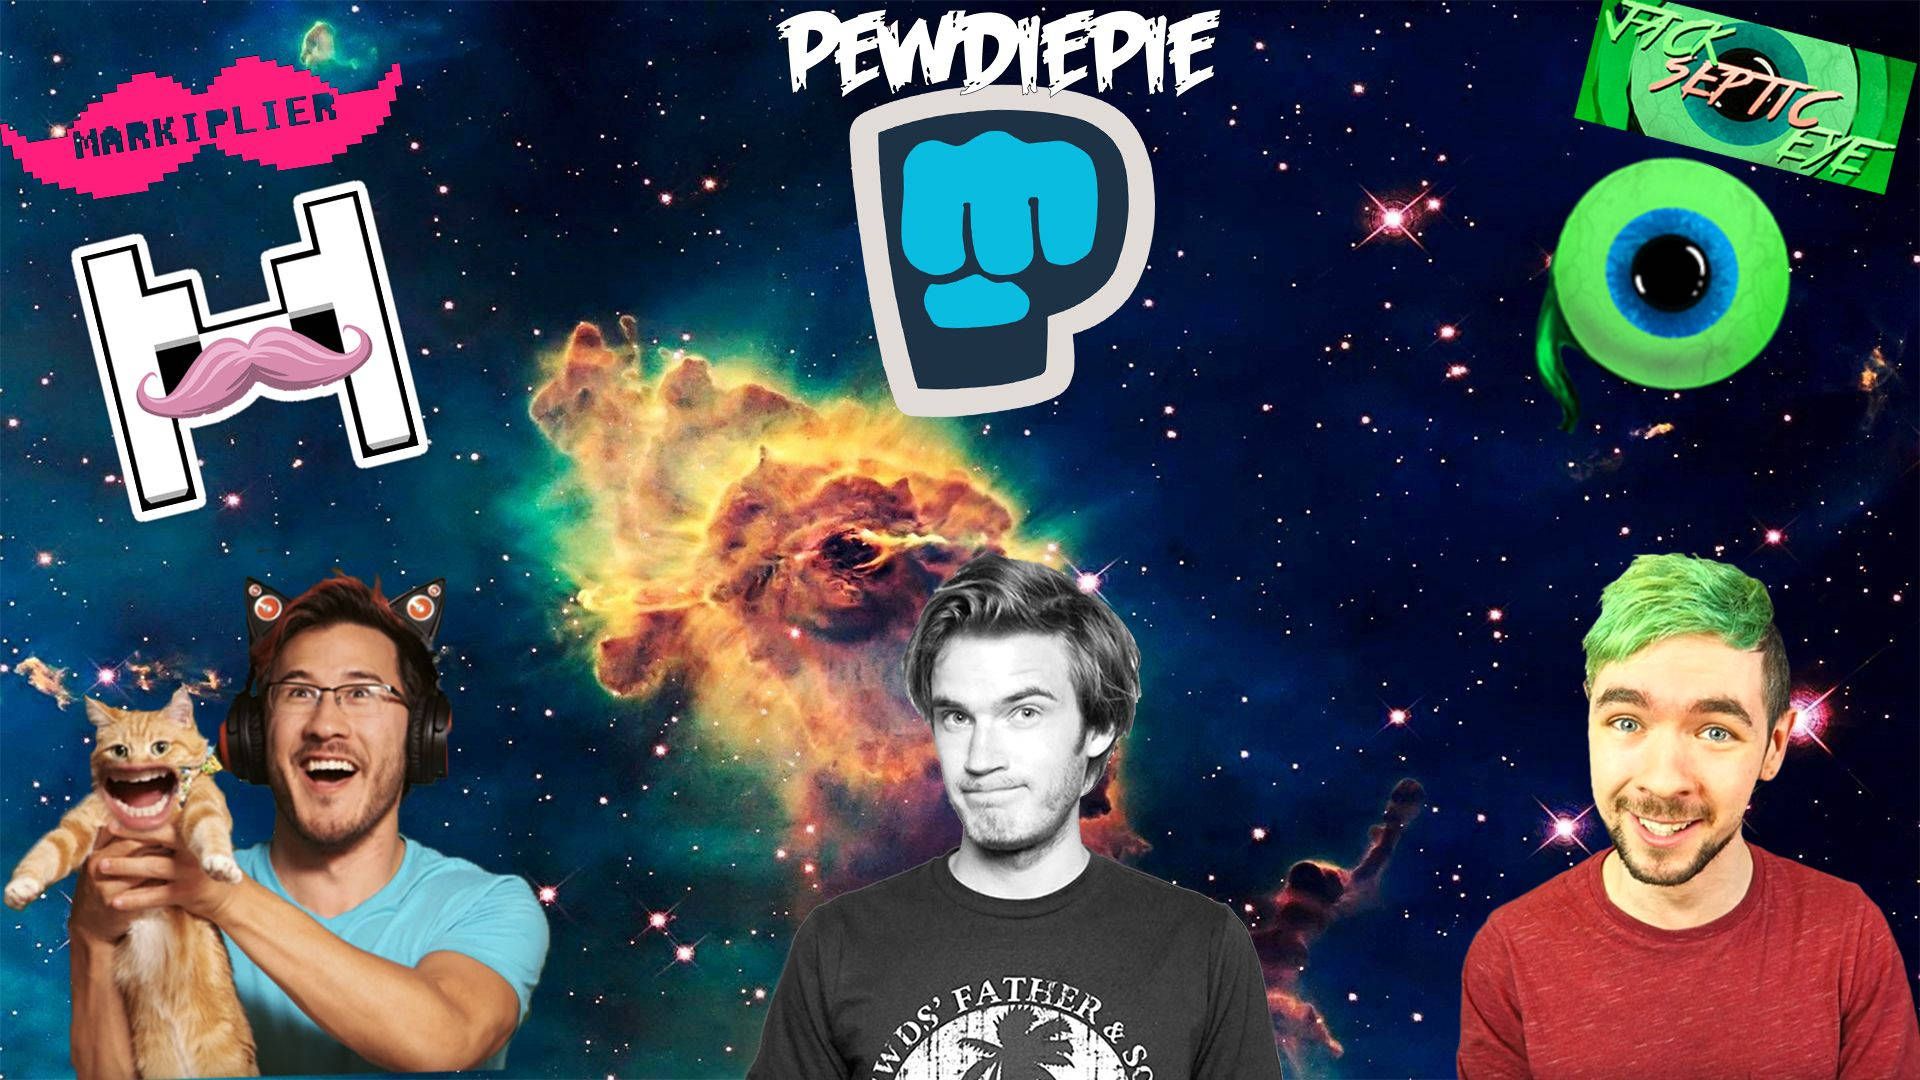 A wallpaper with PewDiePie, Markiplier, and Jacksepticeye on it. - Markiplier